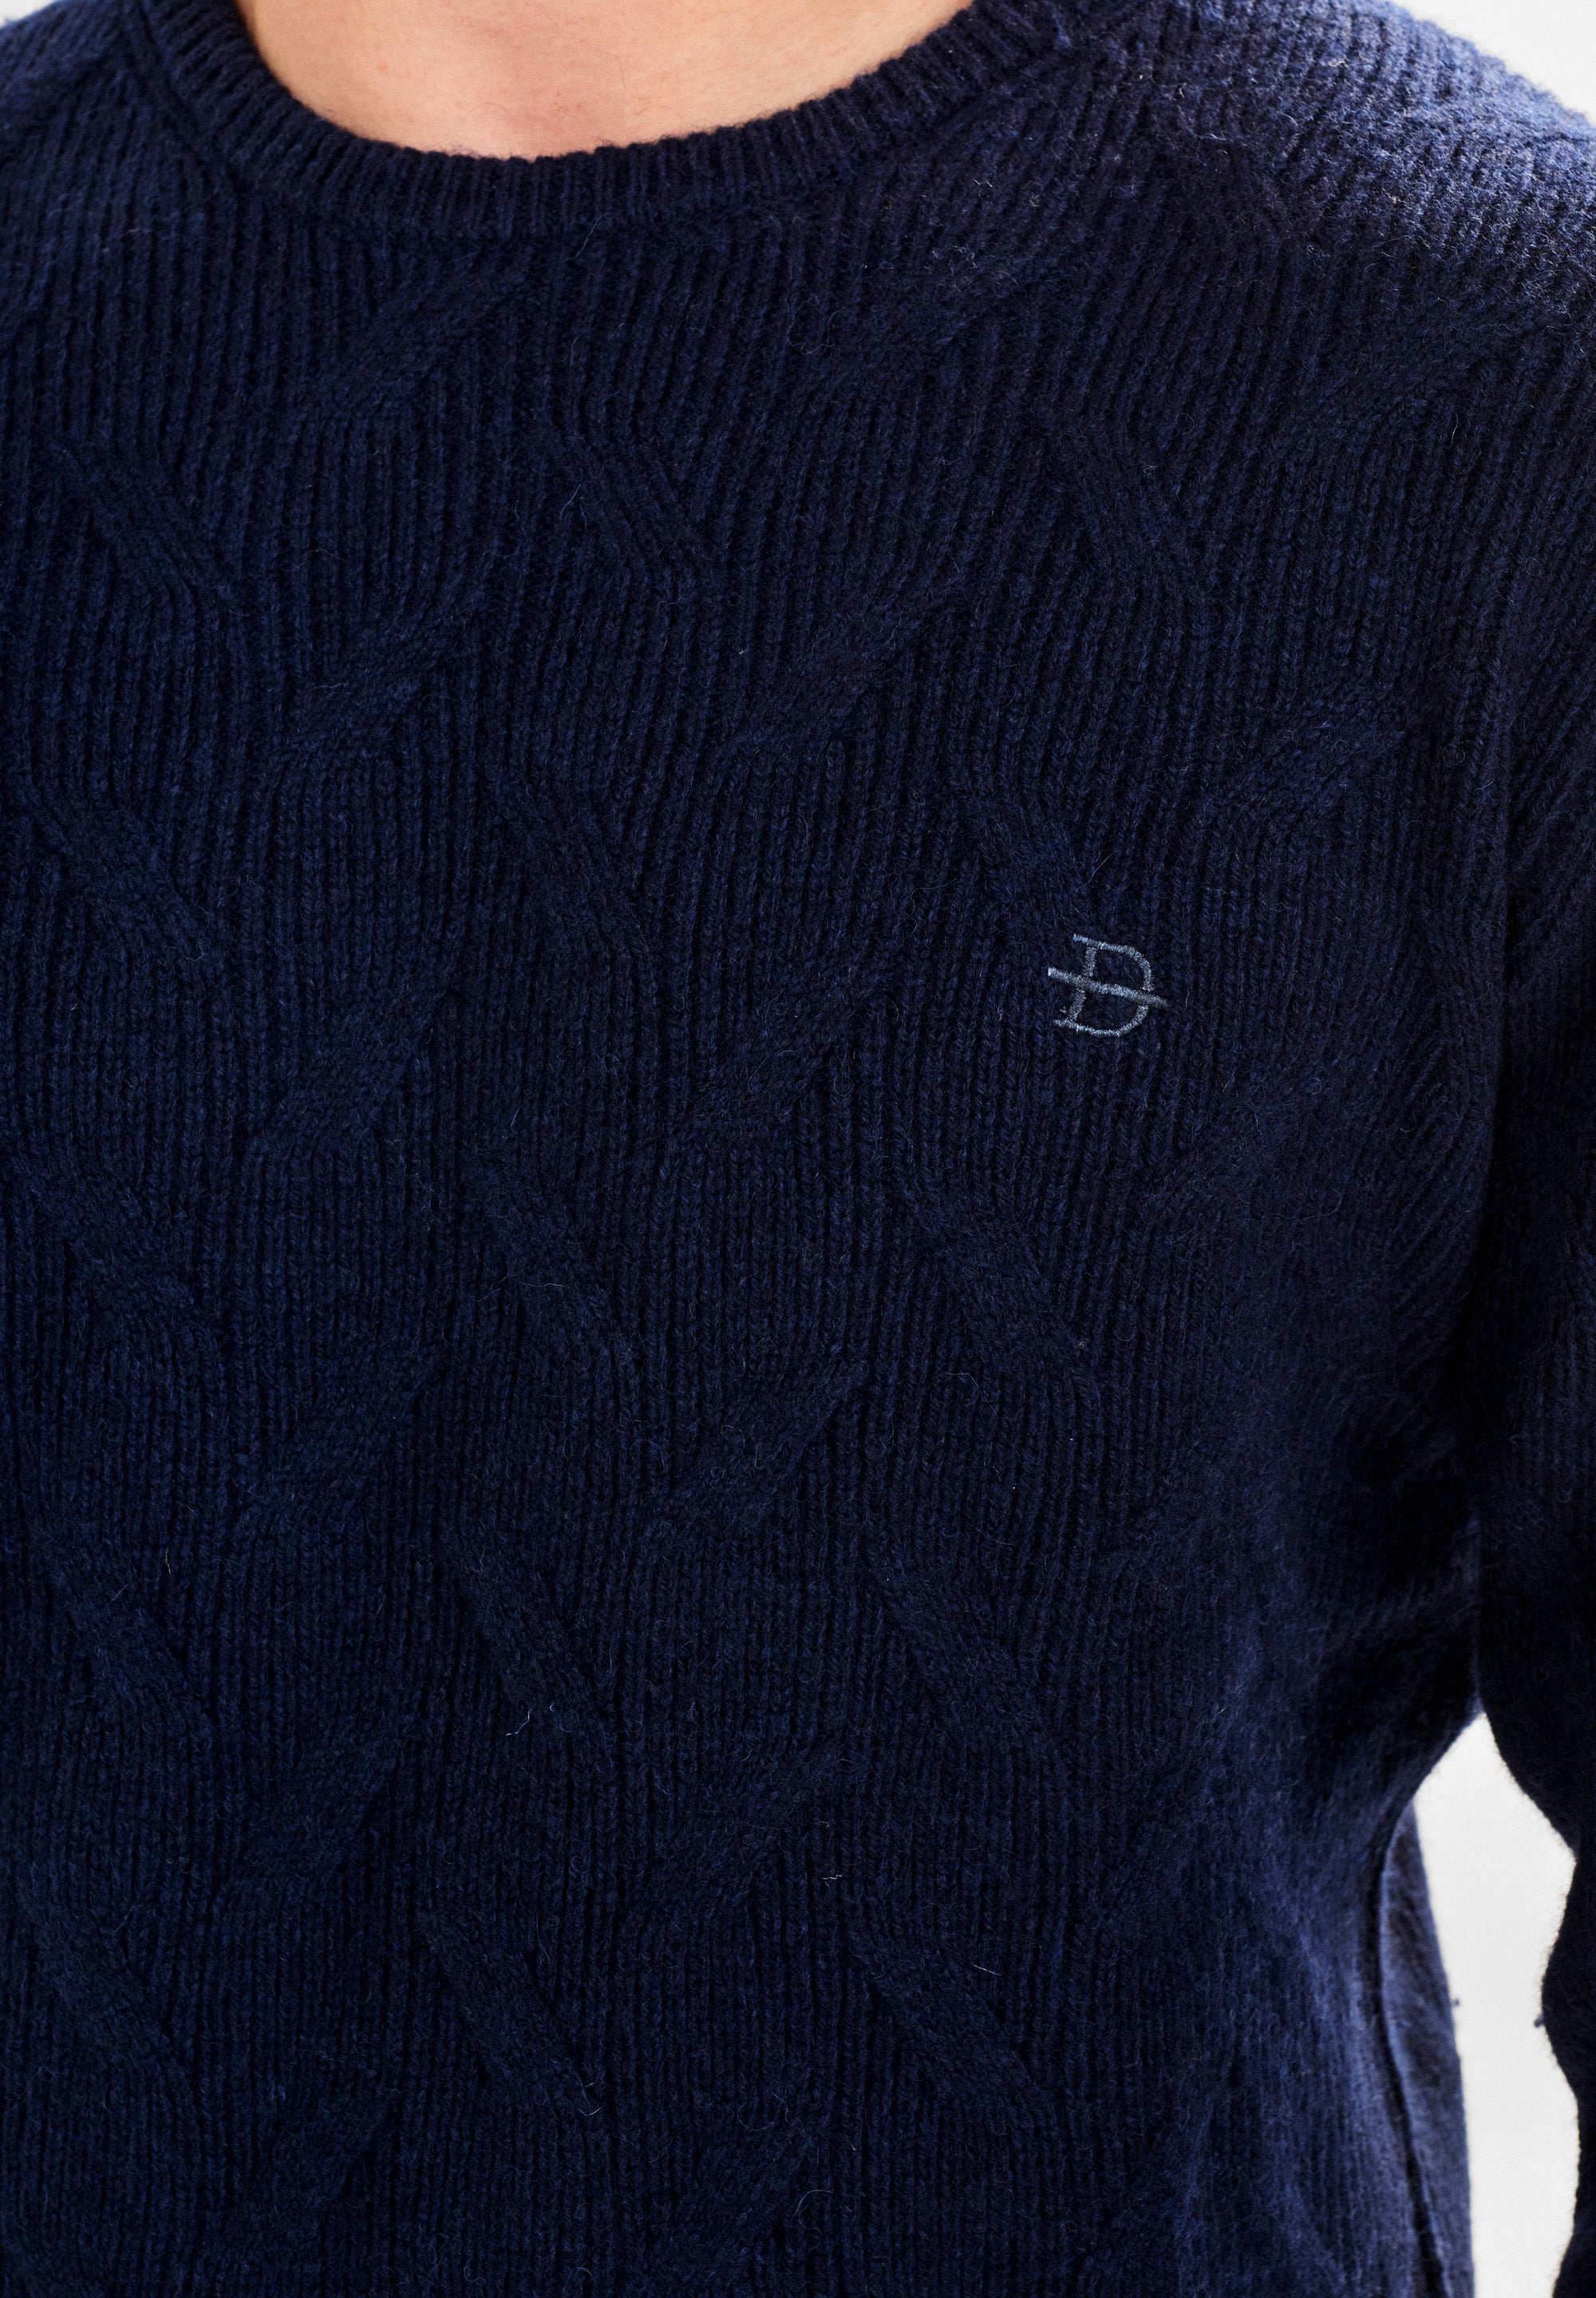 DXNMXRK. DX-Buster Knitwear Carbon